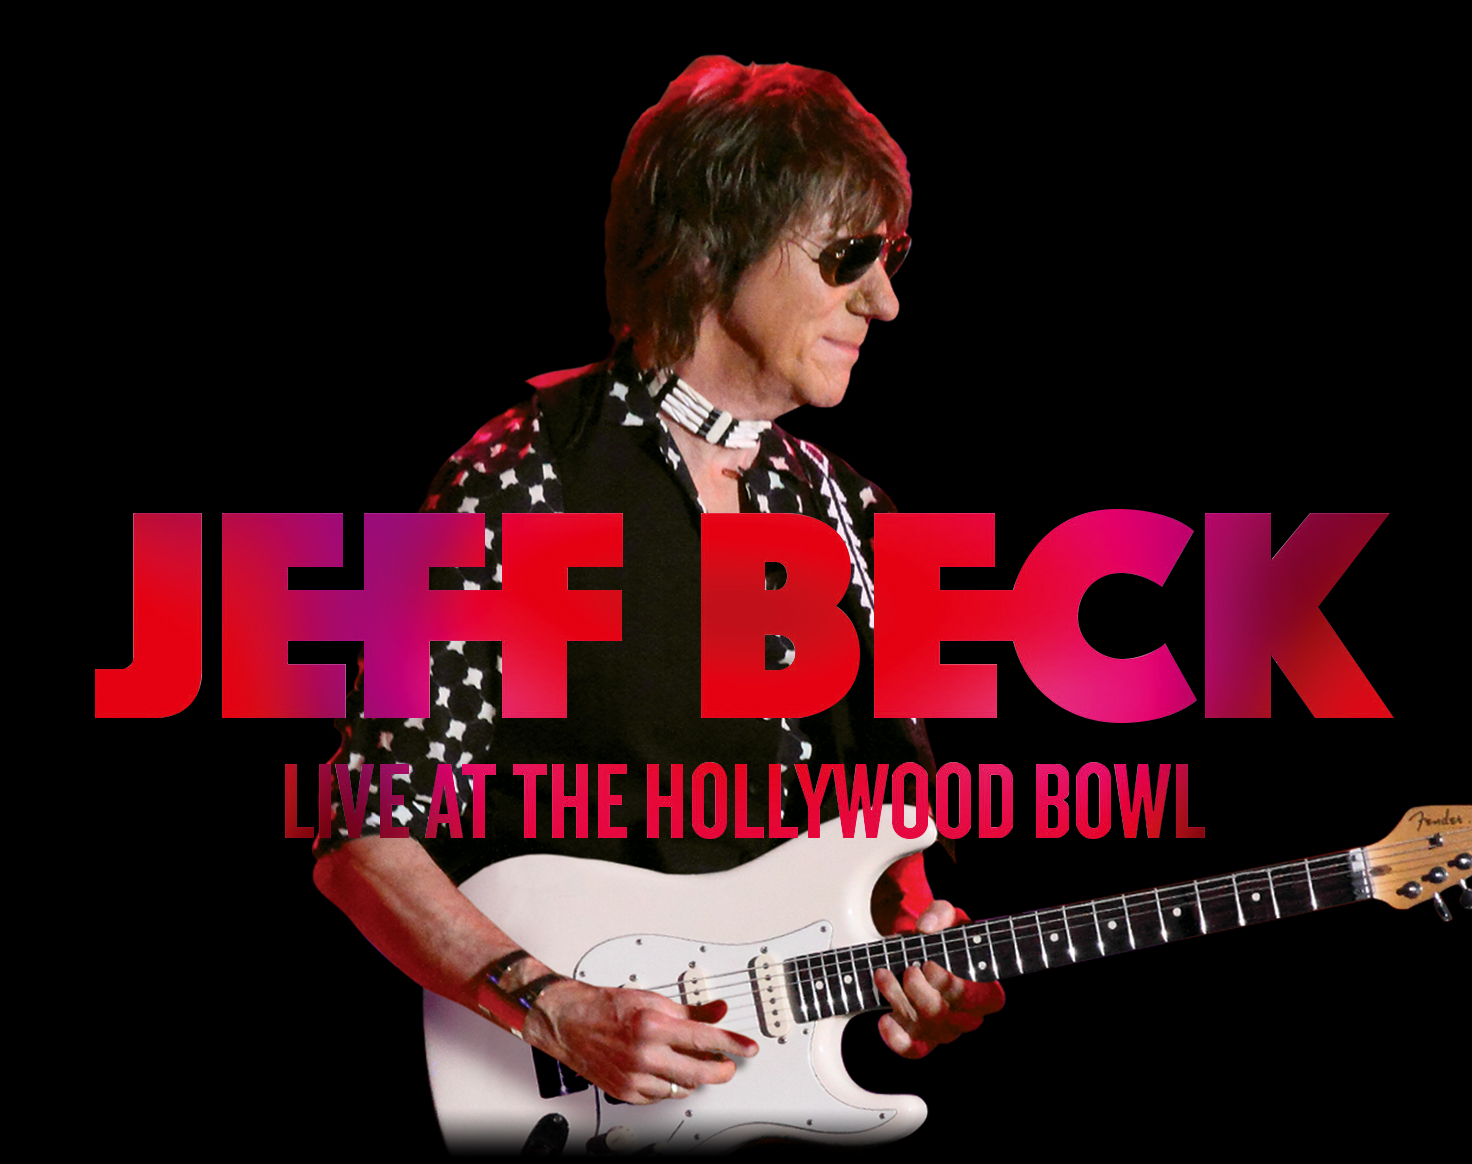 JEFF BECK / LIVE AT THE HOLLYWOOD BOWL